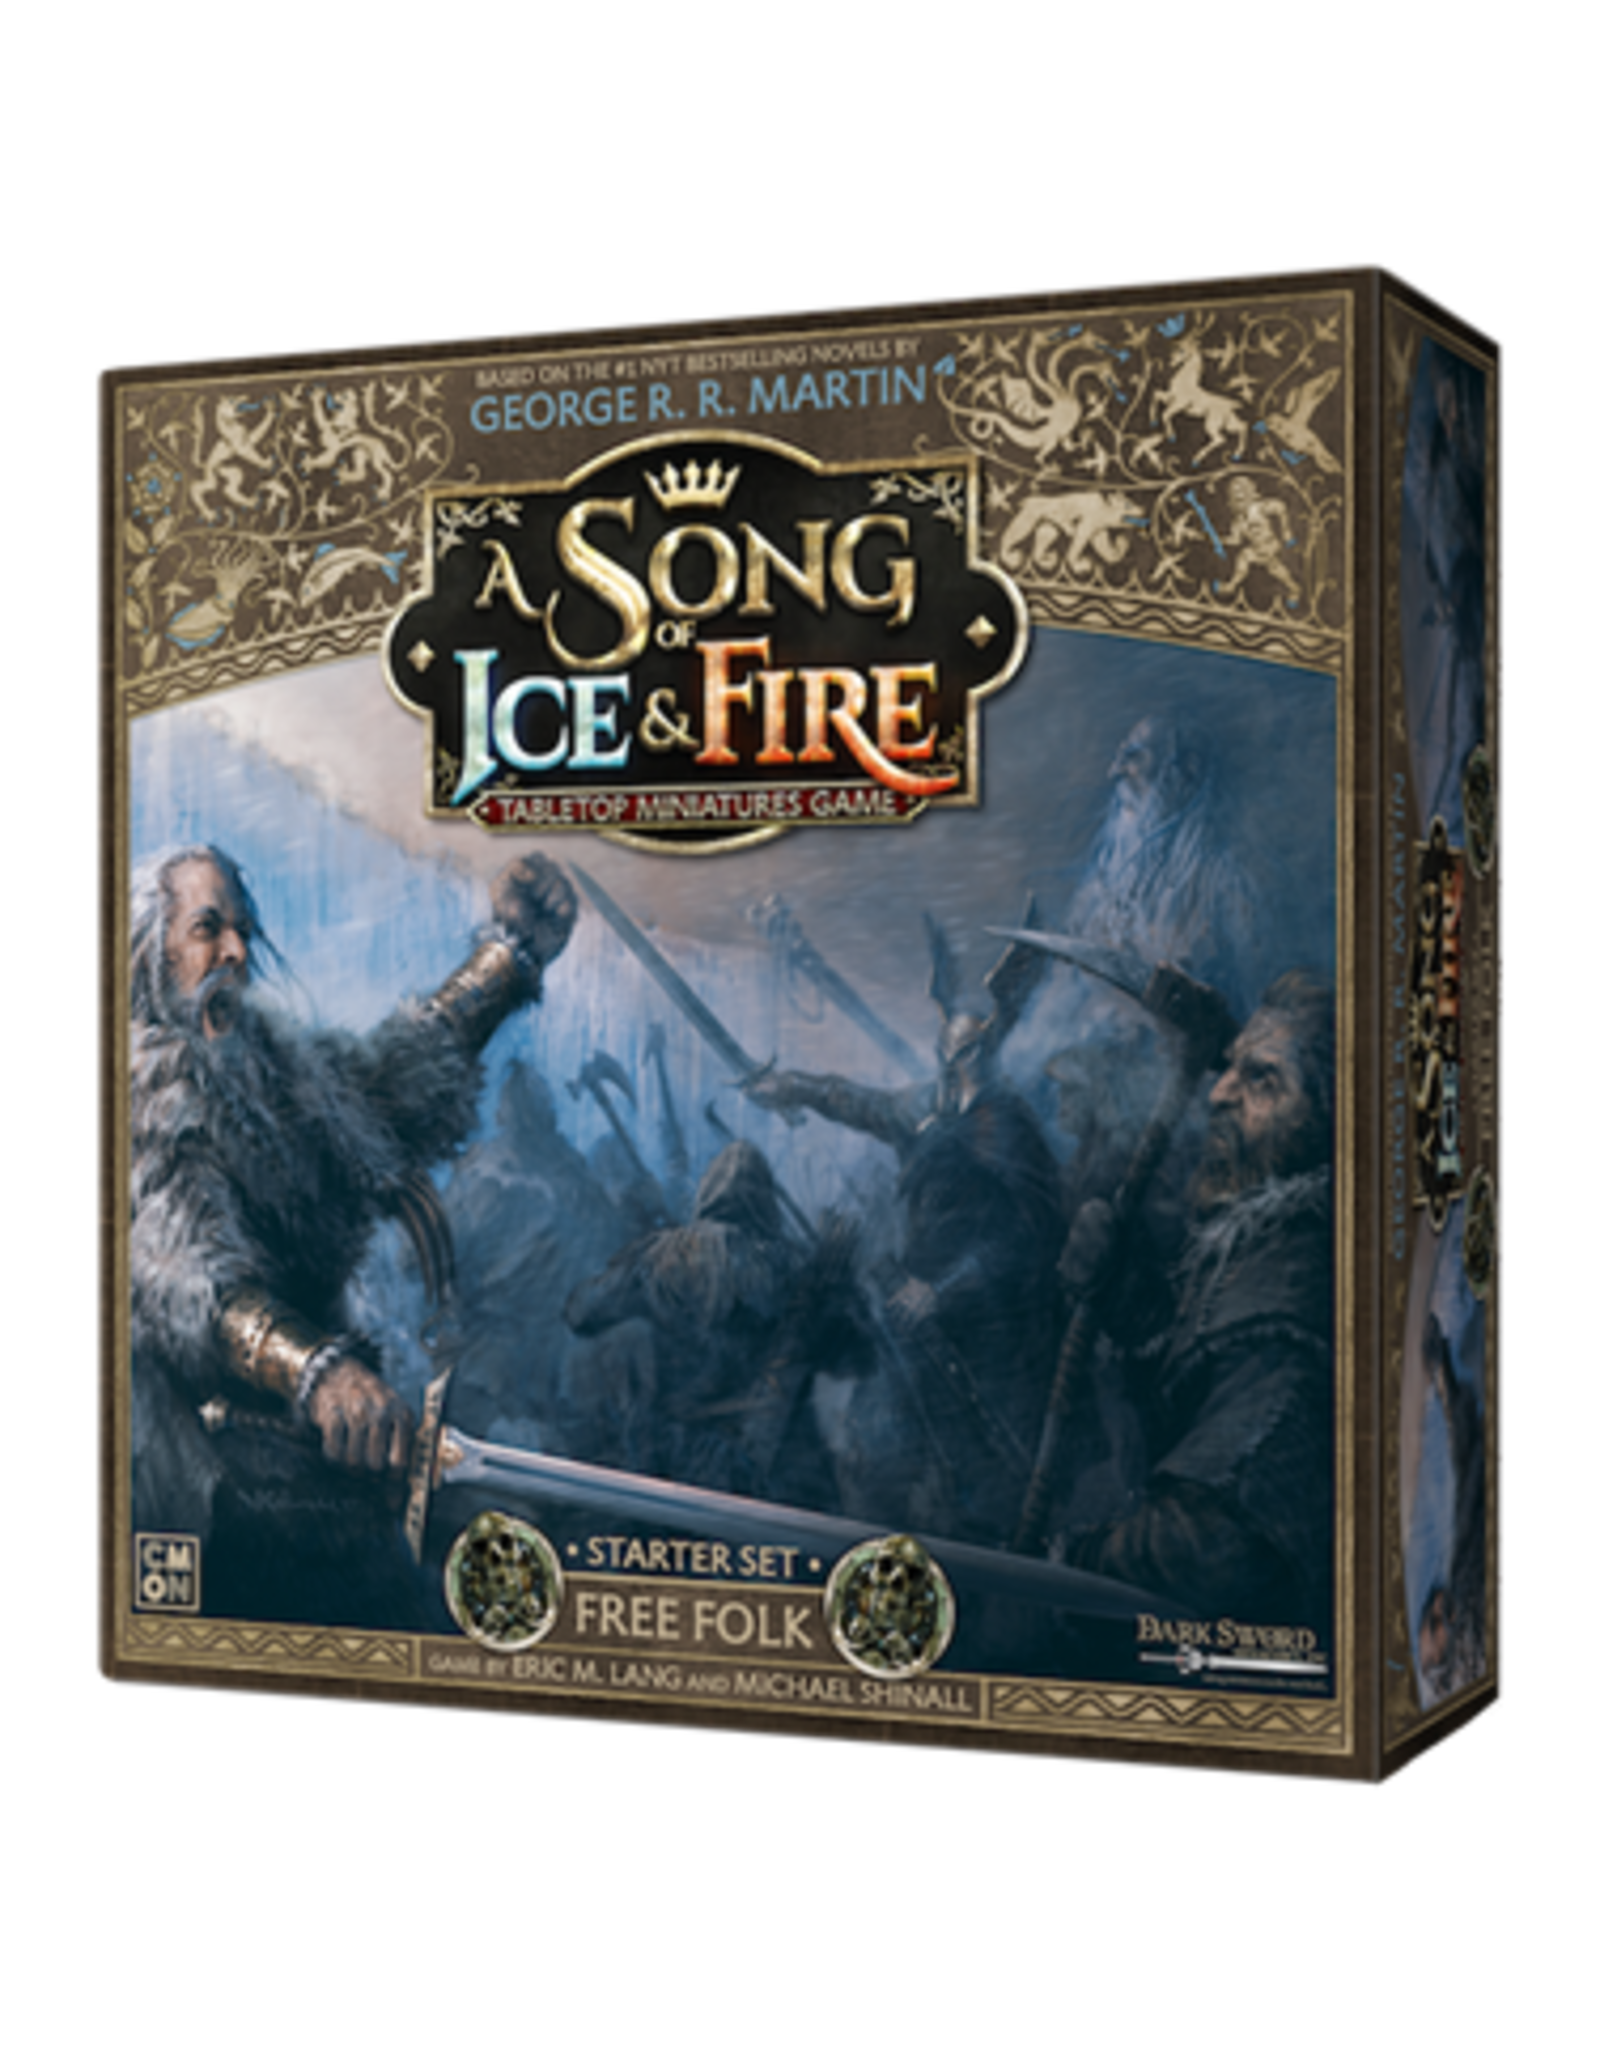 Cool Mini or Not A Song of Ice & Fire Tabletop Miniatures Game: Starter Set - Free Folk